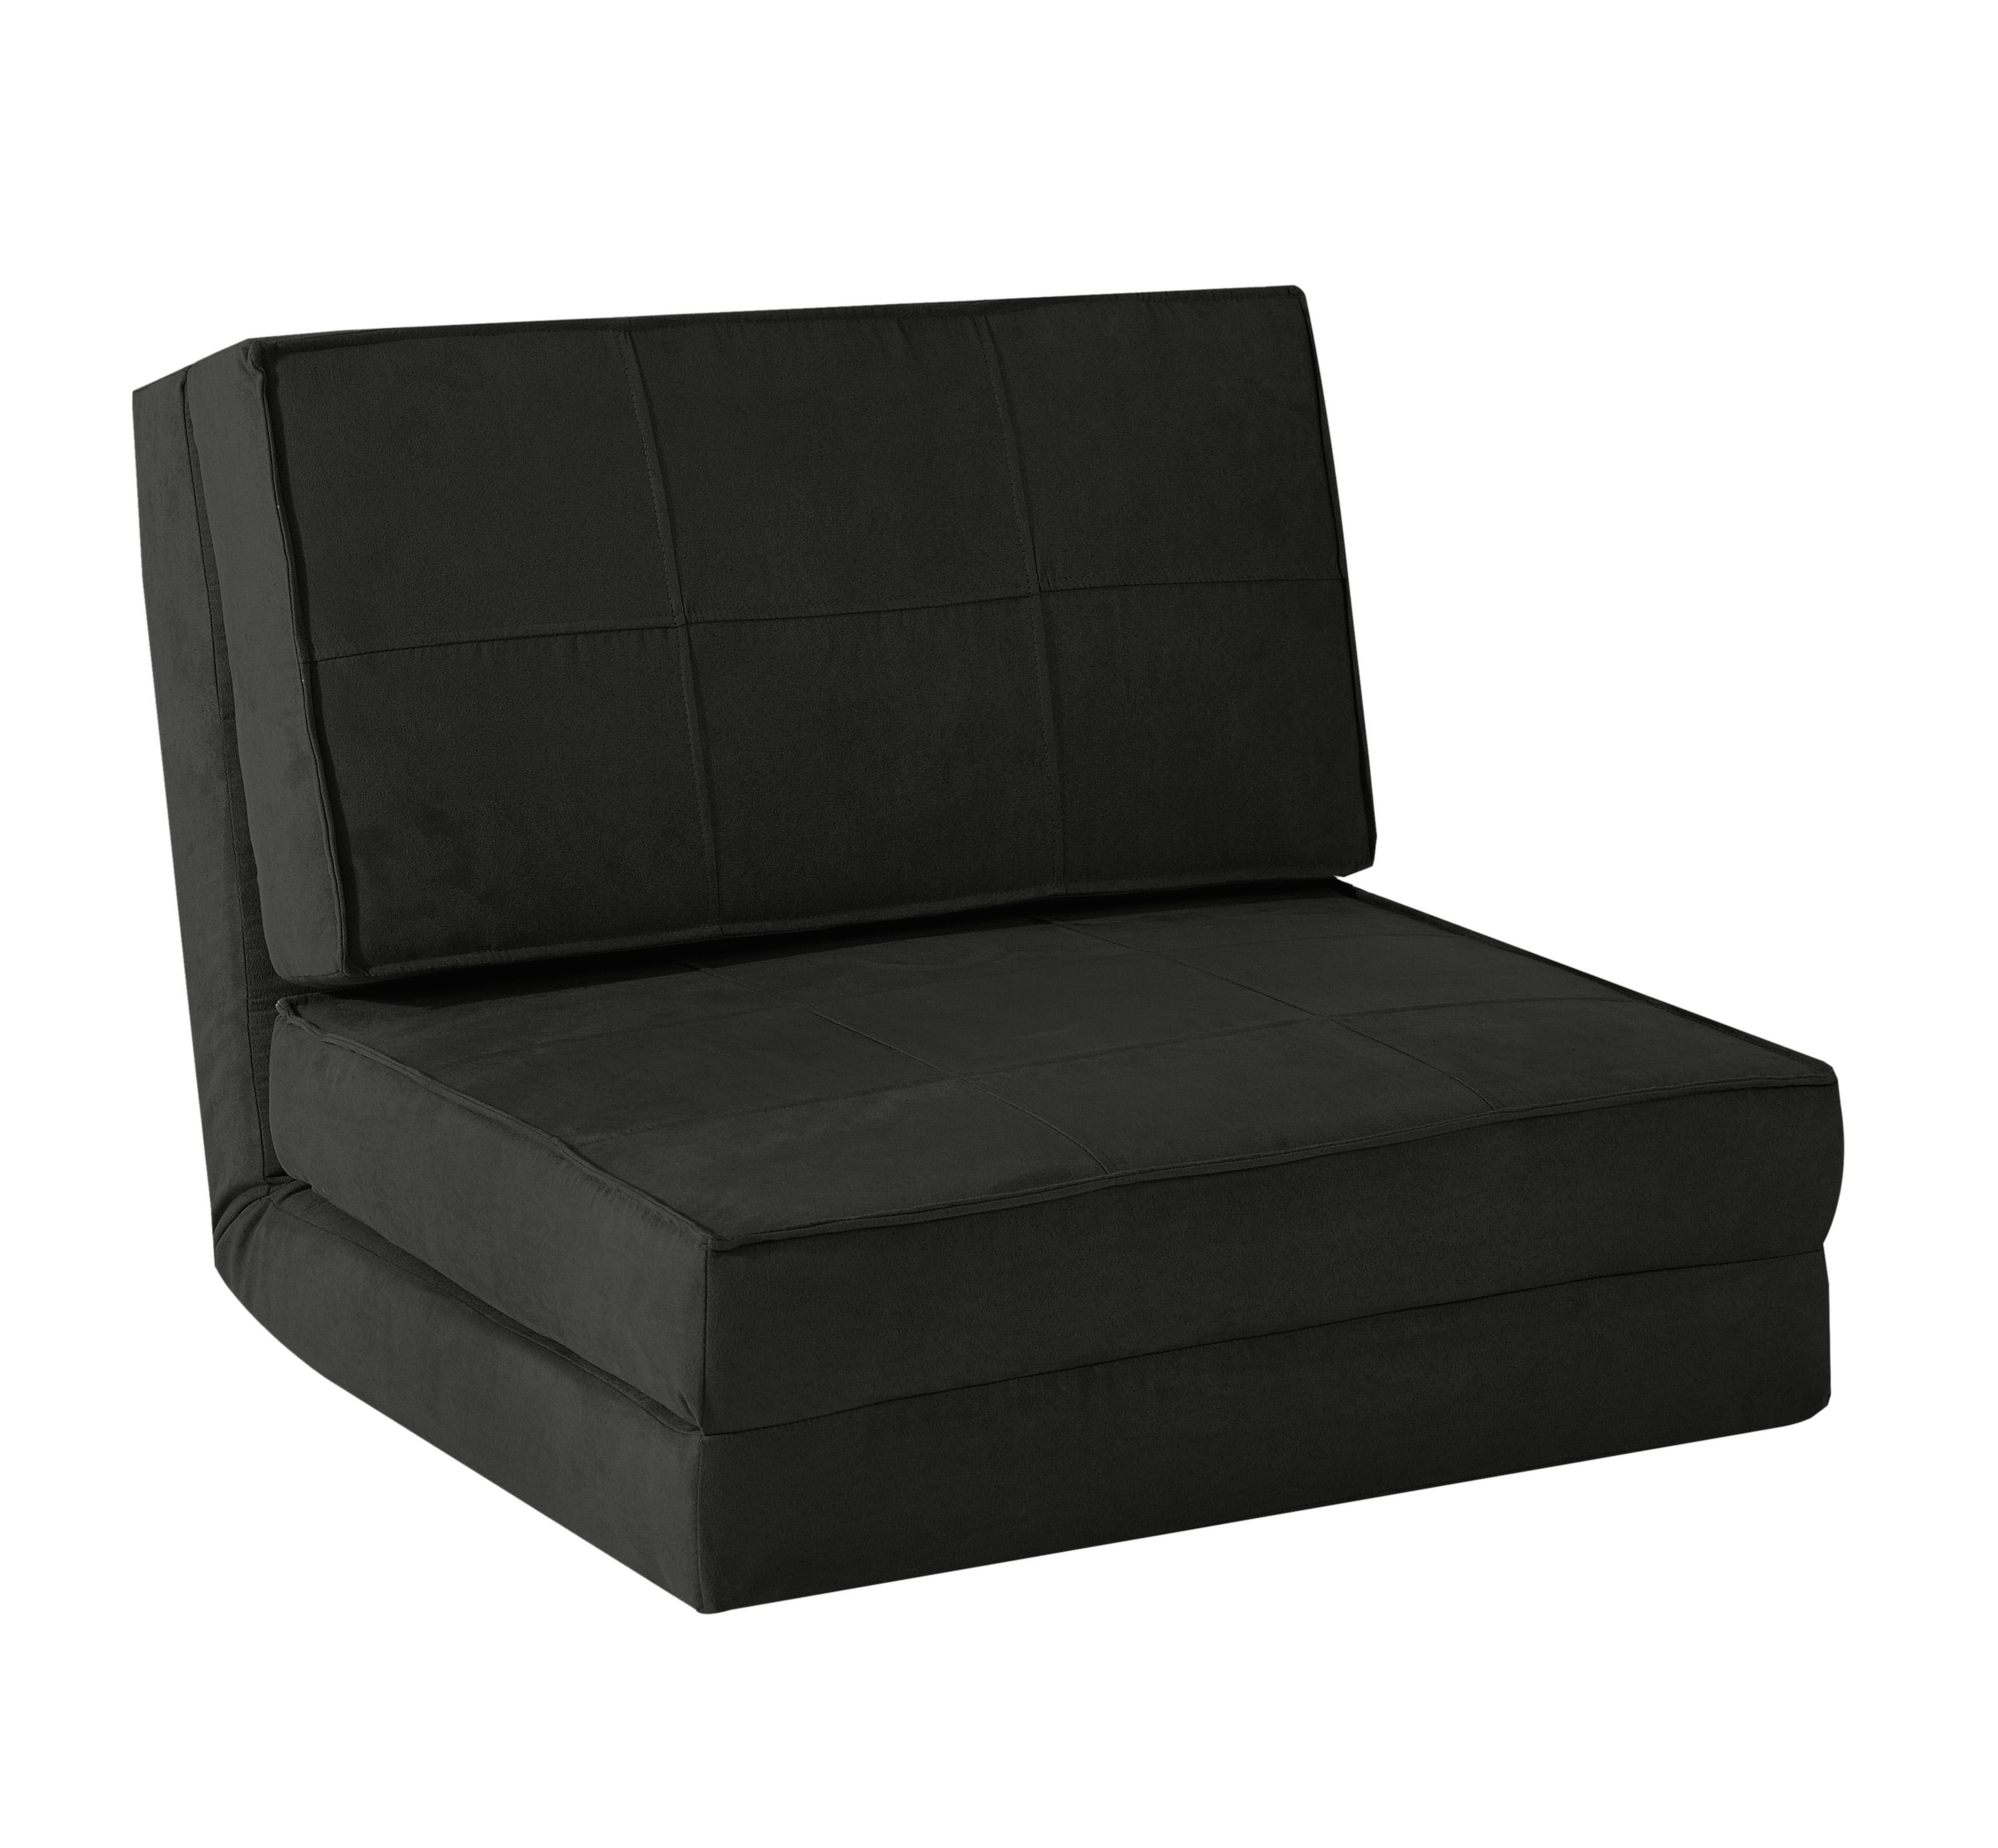 Your Zone Ultra Soft Suede 3 Position Convertible Flip Lounge Chair, Black - image 1 of 7